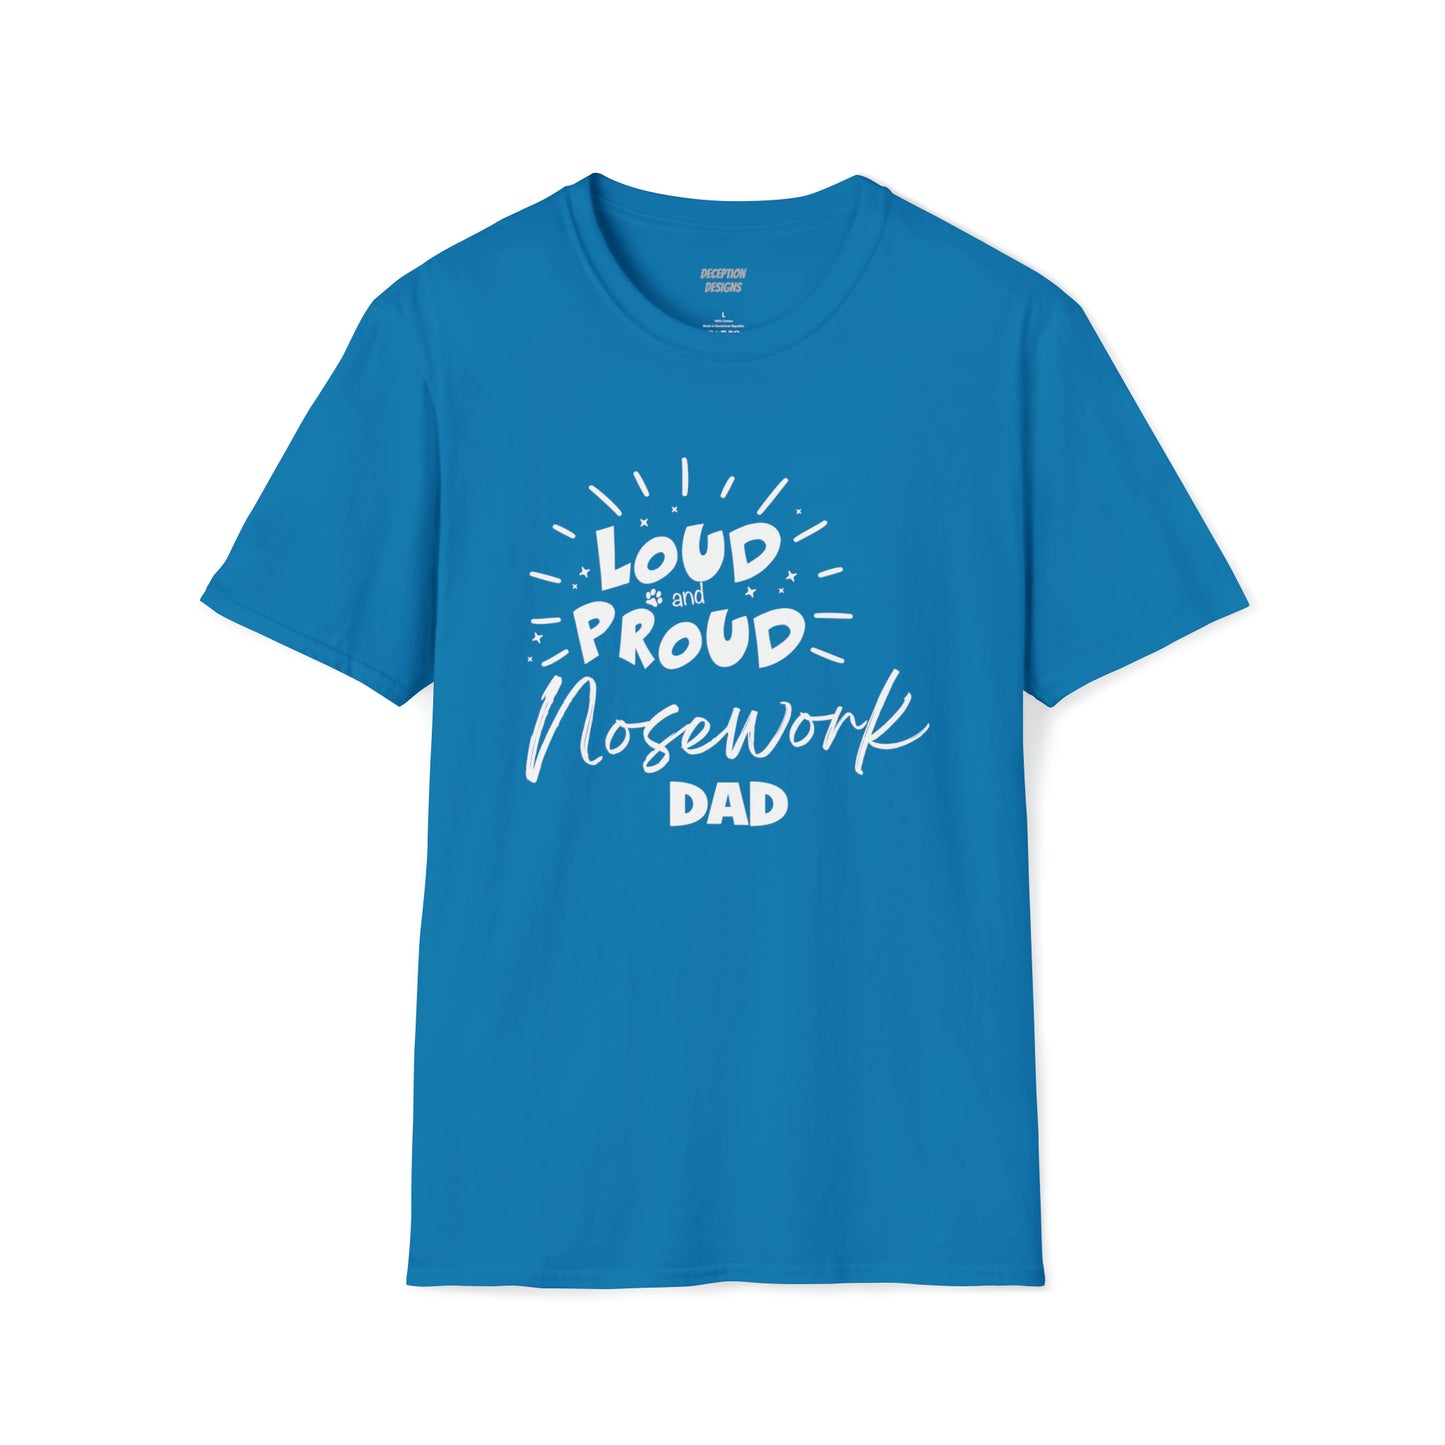 LOUD PROUD NOSEWORK DAD 1 -  Unisex Softstyle T-Shirt